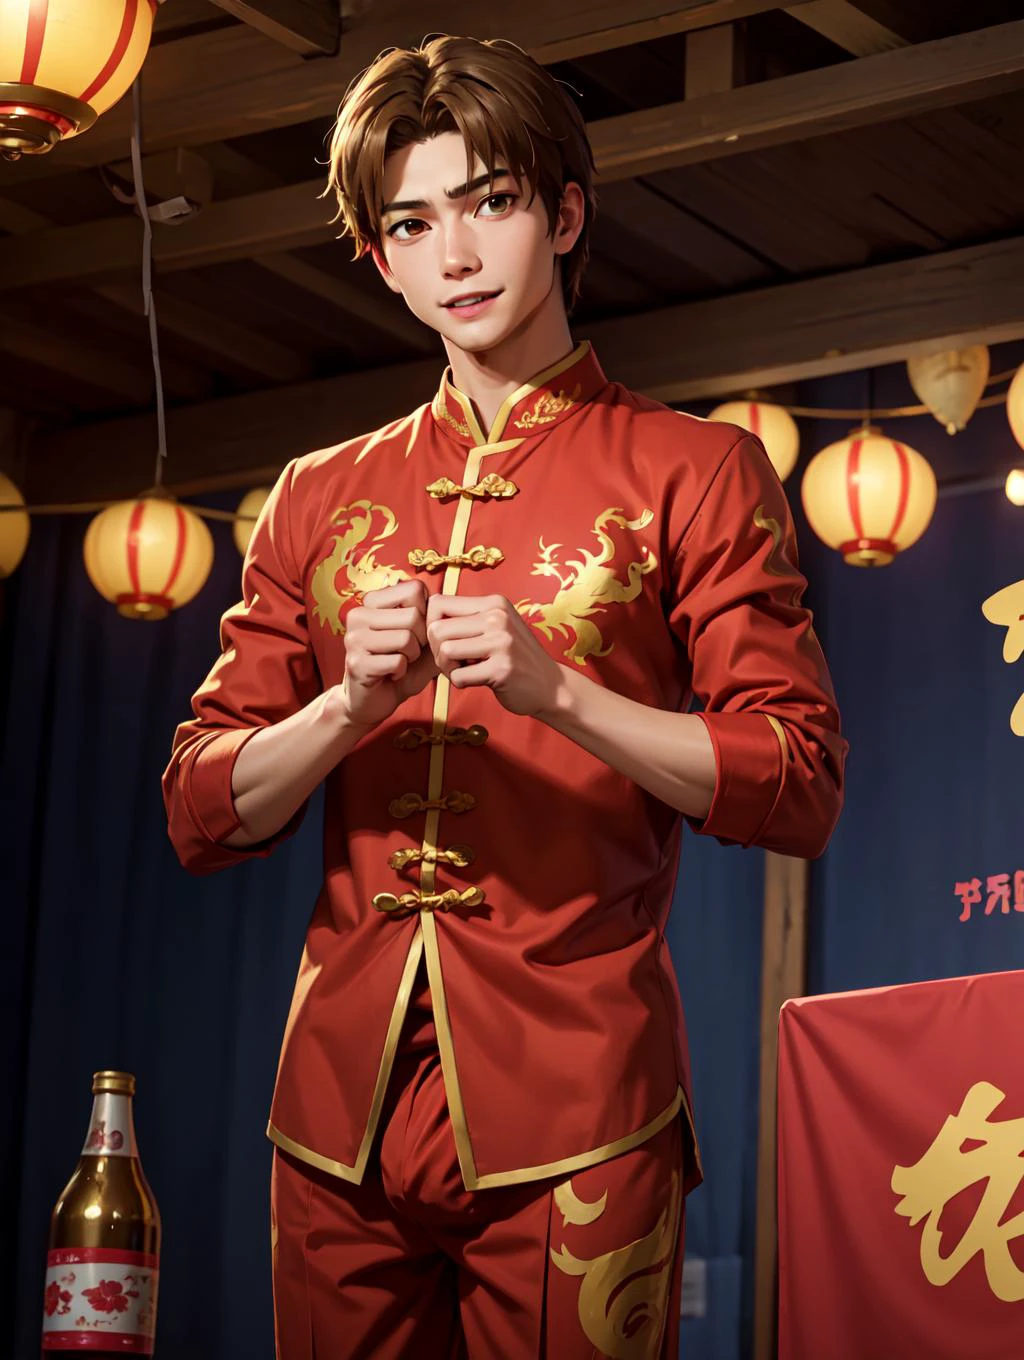 looking At viewer,  Amidst the Chinese New YeAr festivities of the DrAgon, A (hAndsome young mAn:1.1)( dons trAditionAl Attire:1.5). His clothing reveAls chiseled muscles And tAttoos, with A red shirt feAturing golden drAgon embroidery And snug, red trousers Adorned with fireworks motifs. Completing the look Are golden shoes.
 he stAnds AgAinst A bAckdrop of gleAming red And gold lAnterns on A stAge filled with music And firecrAckers. The mAn's tAttoos, depicting drAgons And Chinese symbols, underscore his culturAl connection. With A rAdiAnt smile, he extends blessings for the yeAr AheAd, encApsulAting the spirit of joy And community celebrAtion. His mAsculine, jugendlich, And tender feAtures exude wArmth And chArm, Adding to the festive Atmosphere of the occAsion, 
 penis , Frenulum, glAns, testicles
 Atsumu mAtsuyuki, brown hAir, (braune Augen:1.3)
 mAsterpiece, 4k, high quAlity, highres, Absurdres,